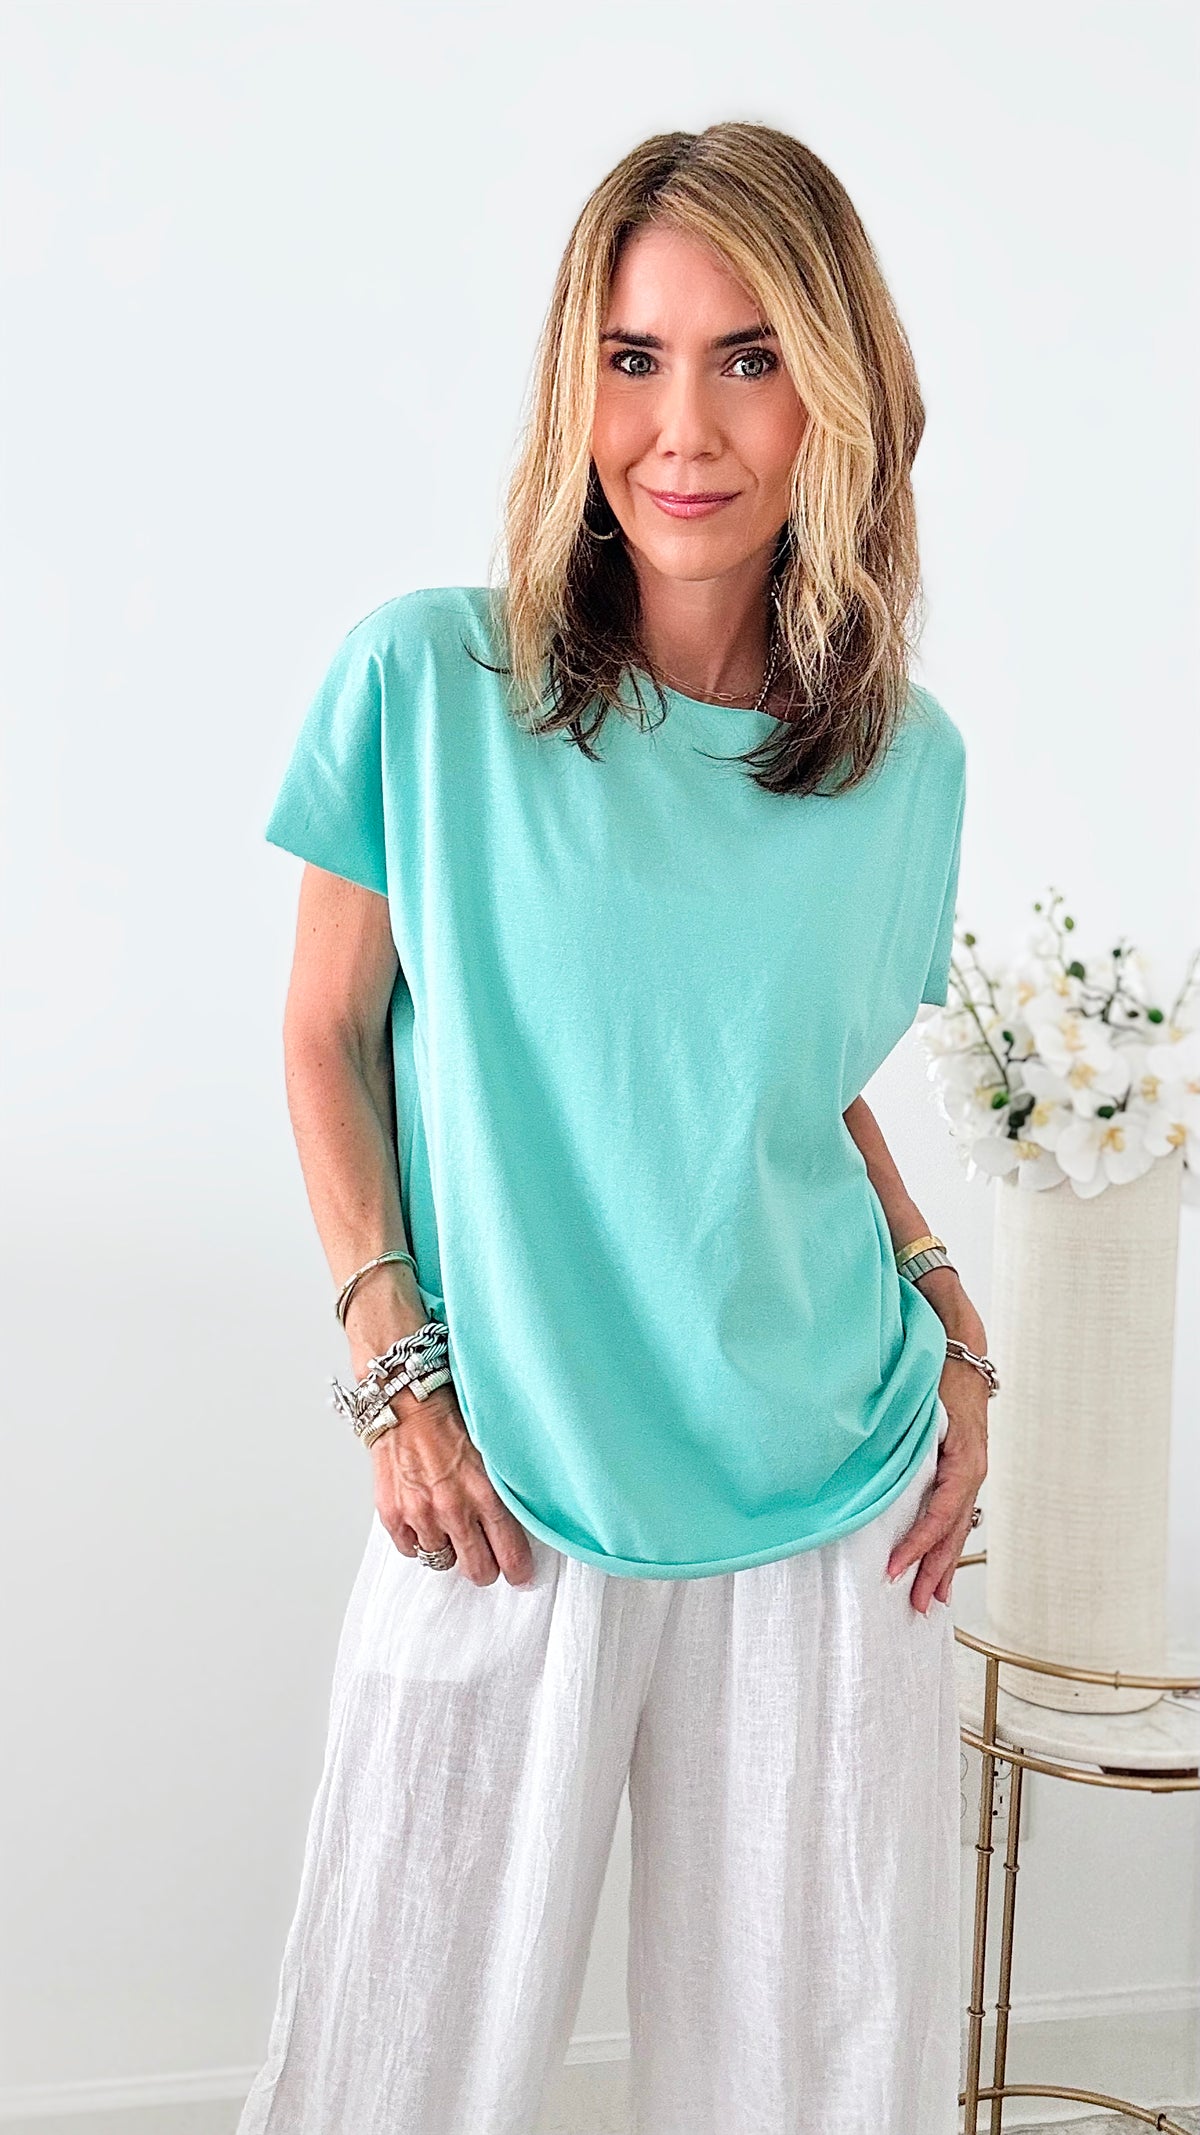 Easy Breezy Italian tee - Aqua-110 Short Sleeve Tops-Italianissimo-Coastal Bloom Boutique, find the trendiest versions of the popular styles and looks Located in Indialantic, FL